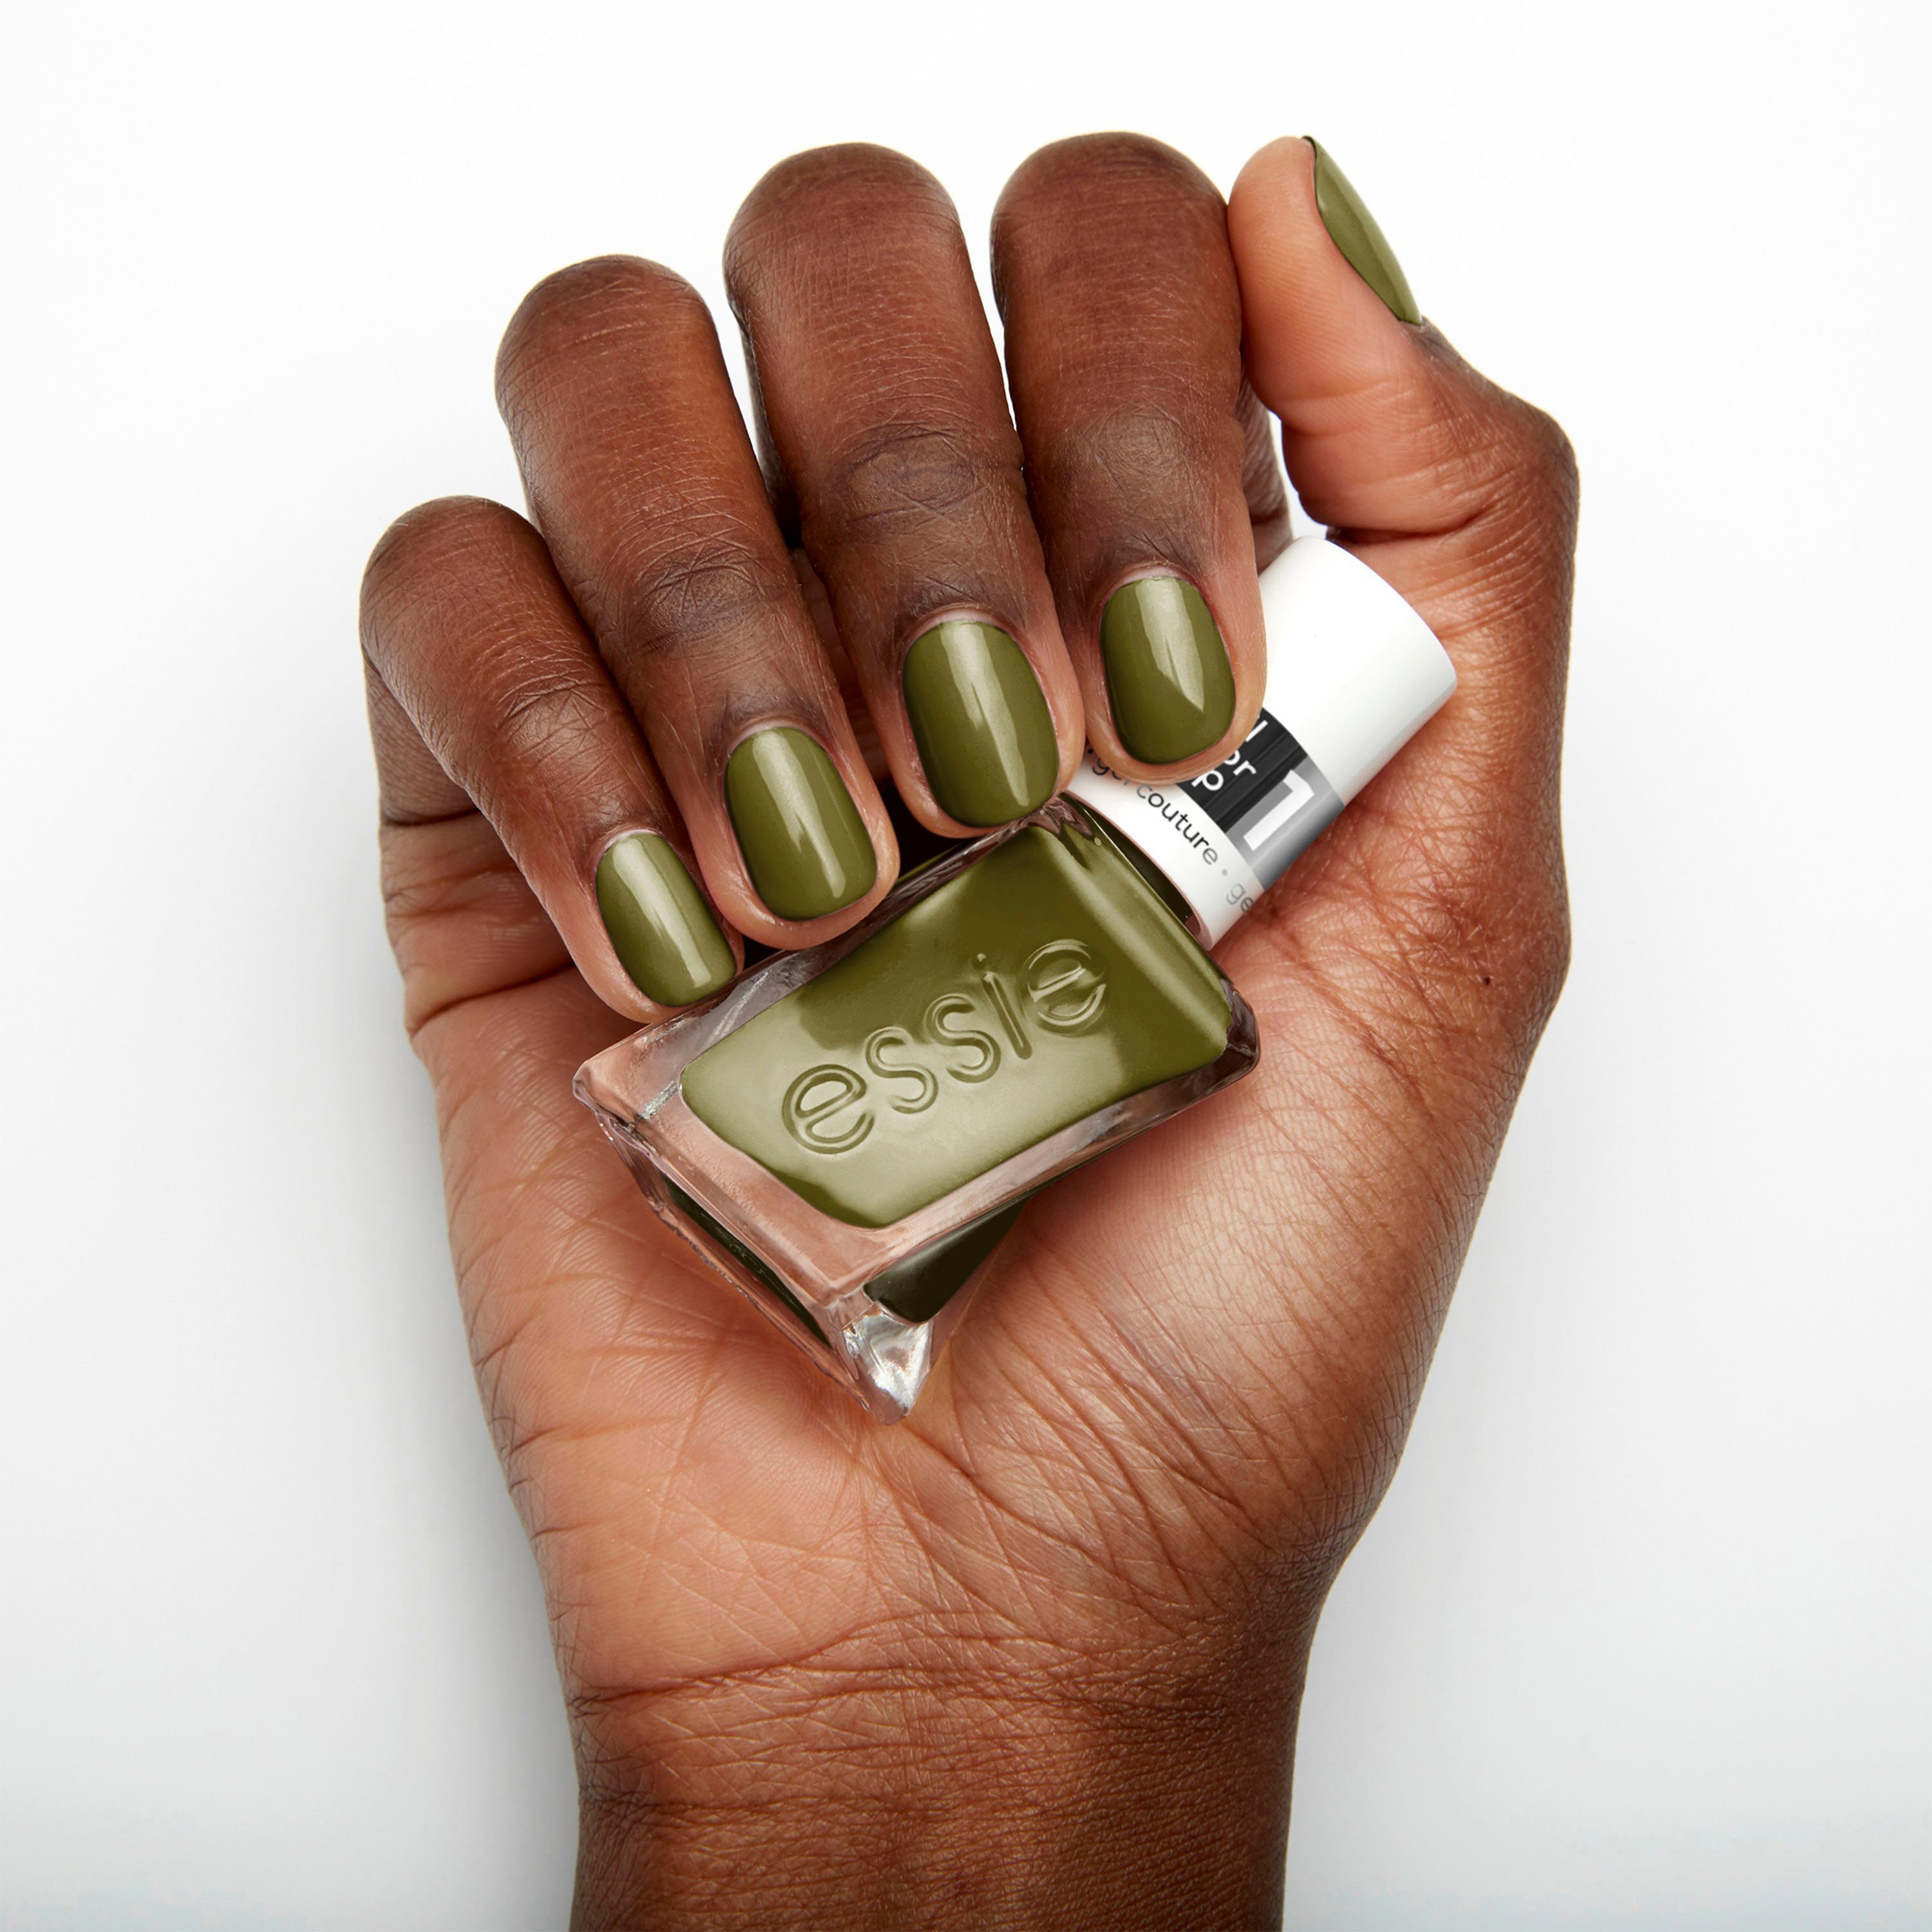 couture gel Nagellack, essie 540 couture totally plaid, - gel